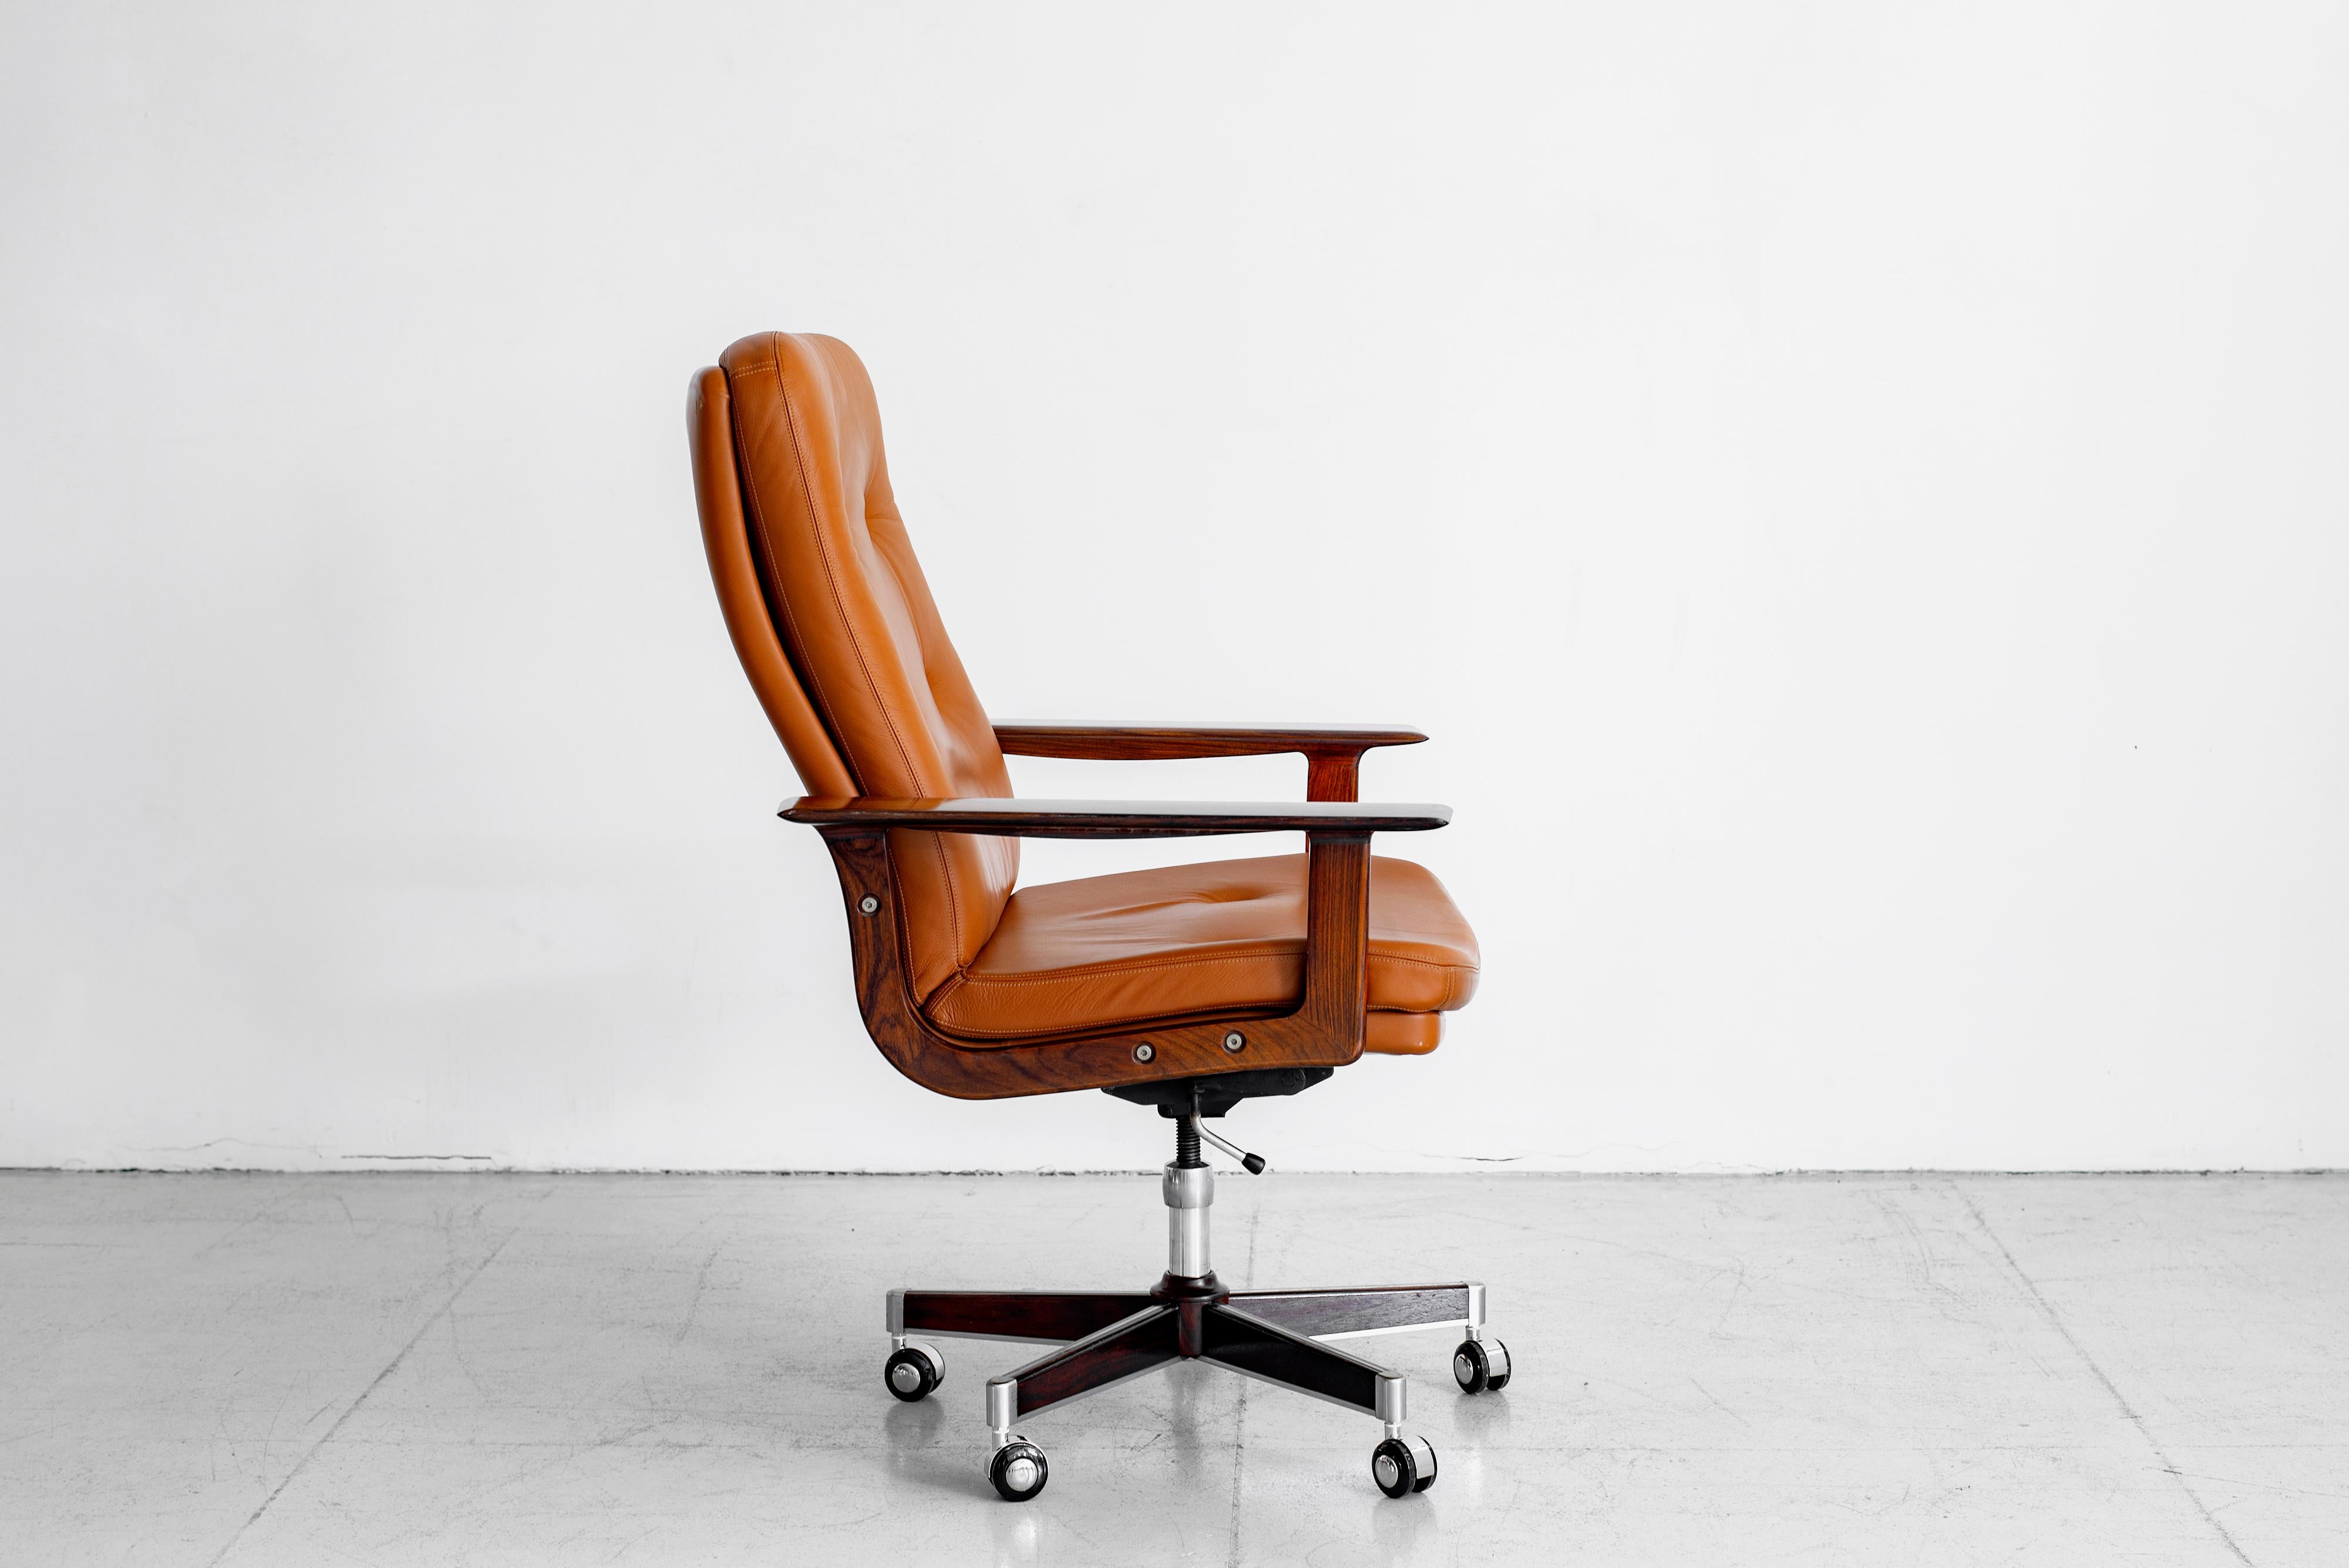 Rare Rosewood and original caramel leather executive office chair by Arne Vodder. 
Original rosewood base and arms.
Chair swivels and pivots. 
Adjustable in height. 
Leather has wear typical with its age - see detailed photos.